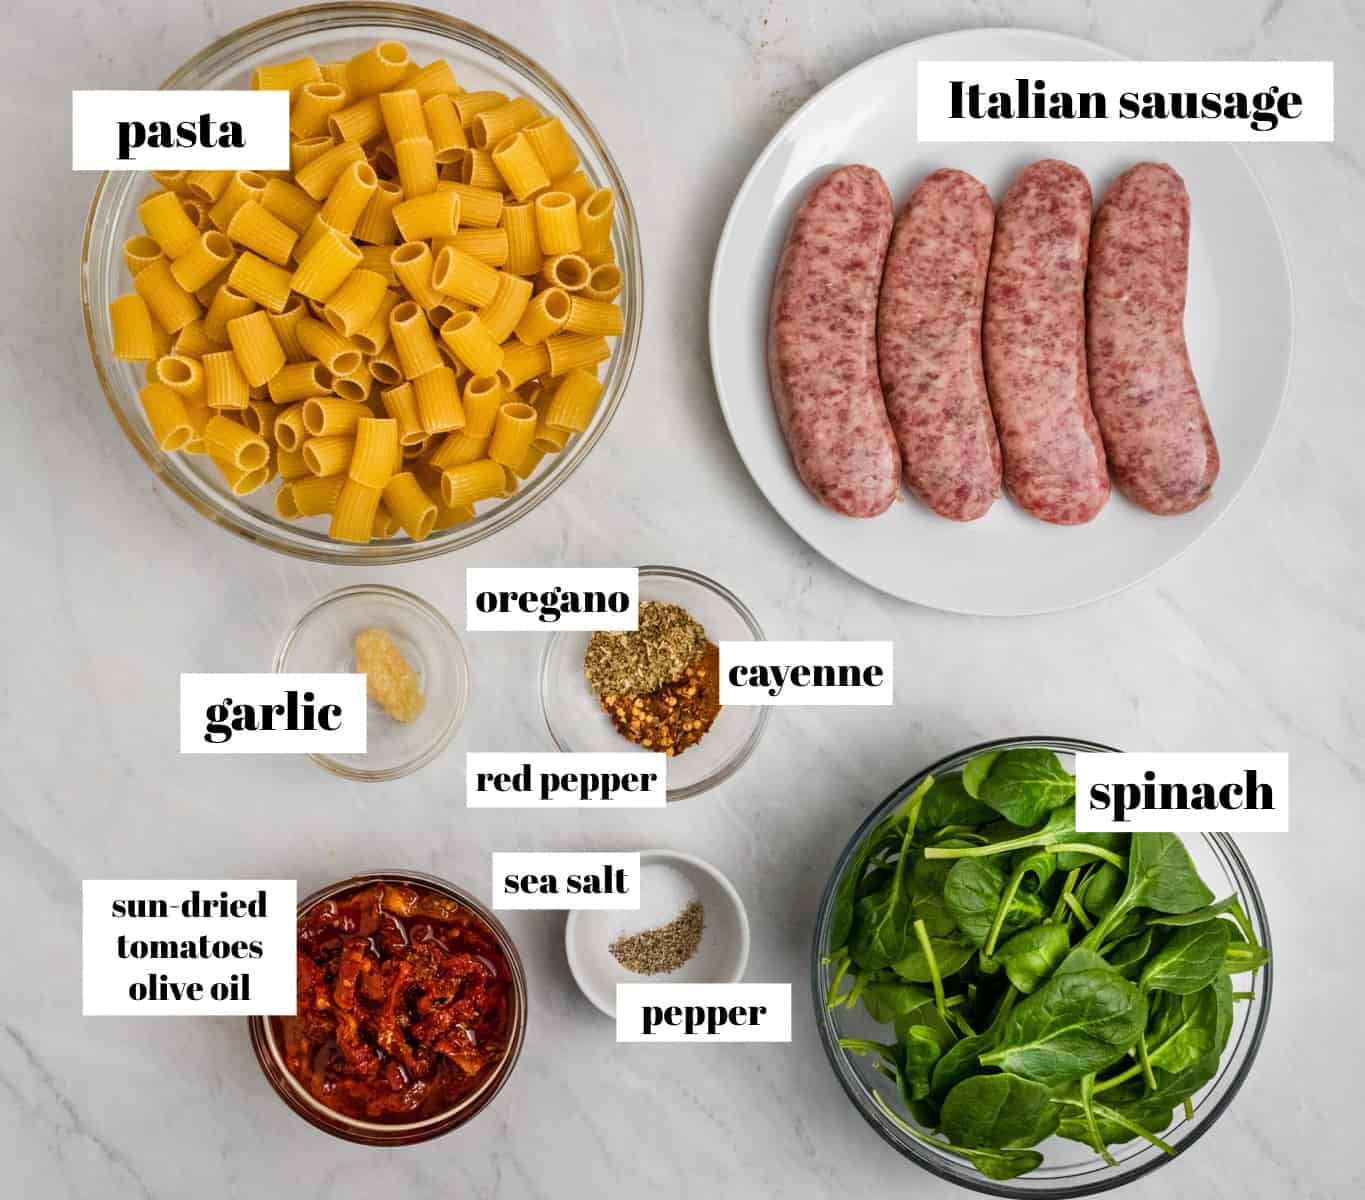 Rigatoni, spinach, garlic and other ingredients labeled on counter.